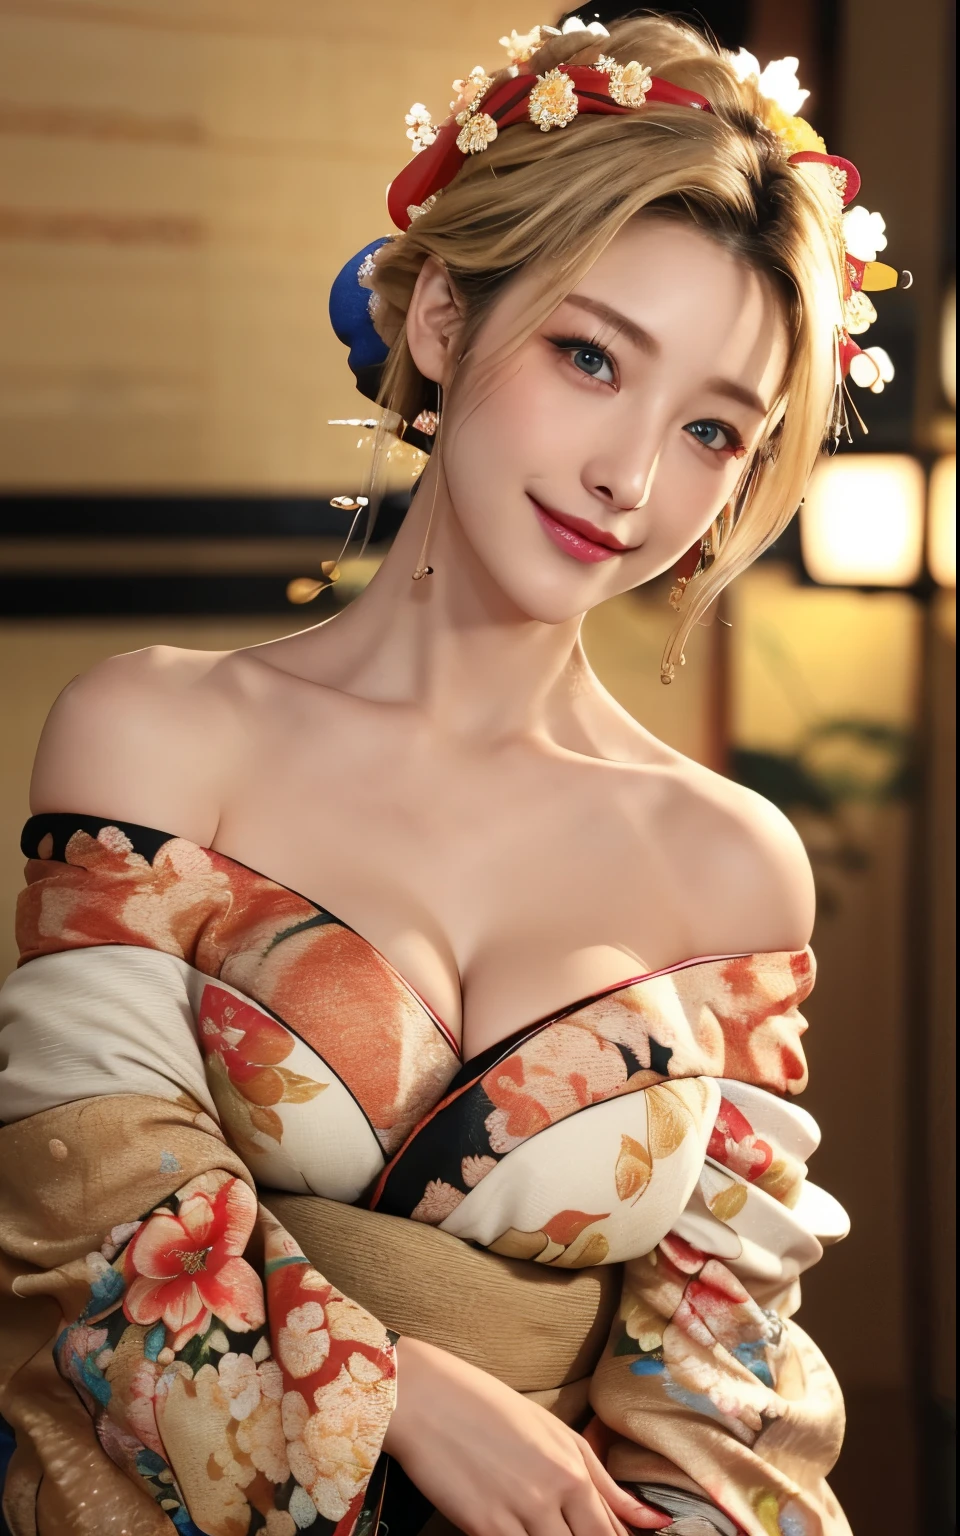 Realistic:1.8、bionde、Italian、highest quality、1 girl、,Glowing Skin、Professional Lighting,Photorealistic、Perfect body、super high quality、Ultra-high Realistic image quality、Japanese、(Off-the-shoulder short length floral print kimono:1.6)、(Cleavage:1.5)、Tight waist、(bionde:1.3)、(Blurred Background)、(Grin)、、Blue eyes、bionde、Tattoos all over the body、short hair、Hair tied up、Full body photo、Sexy Face、short hair、 A look of complete lust、(((masterpiece)))、((highest quality))、((超Realistic))、Mature woman、Mature woman、perspective、Very detailed、The perfect temptation、Best image quality、Fine-grained image quality、beautiful、European, woman, French, woman Italian, Italian, smile、Blue eyes、jewelry, Blue eyes, Realistic, High resolution, Soft Light,Hip Up, Glowing Skin, (Detailed face),tattoo, jewelry, , night, bionde, Wavy Hair,attractive appearance, smile, Perfect Style, Perfect balance,